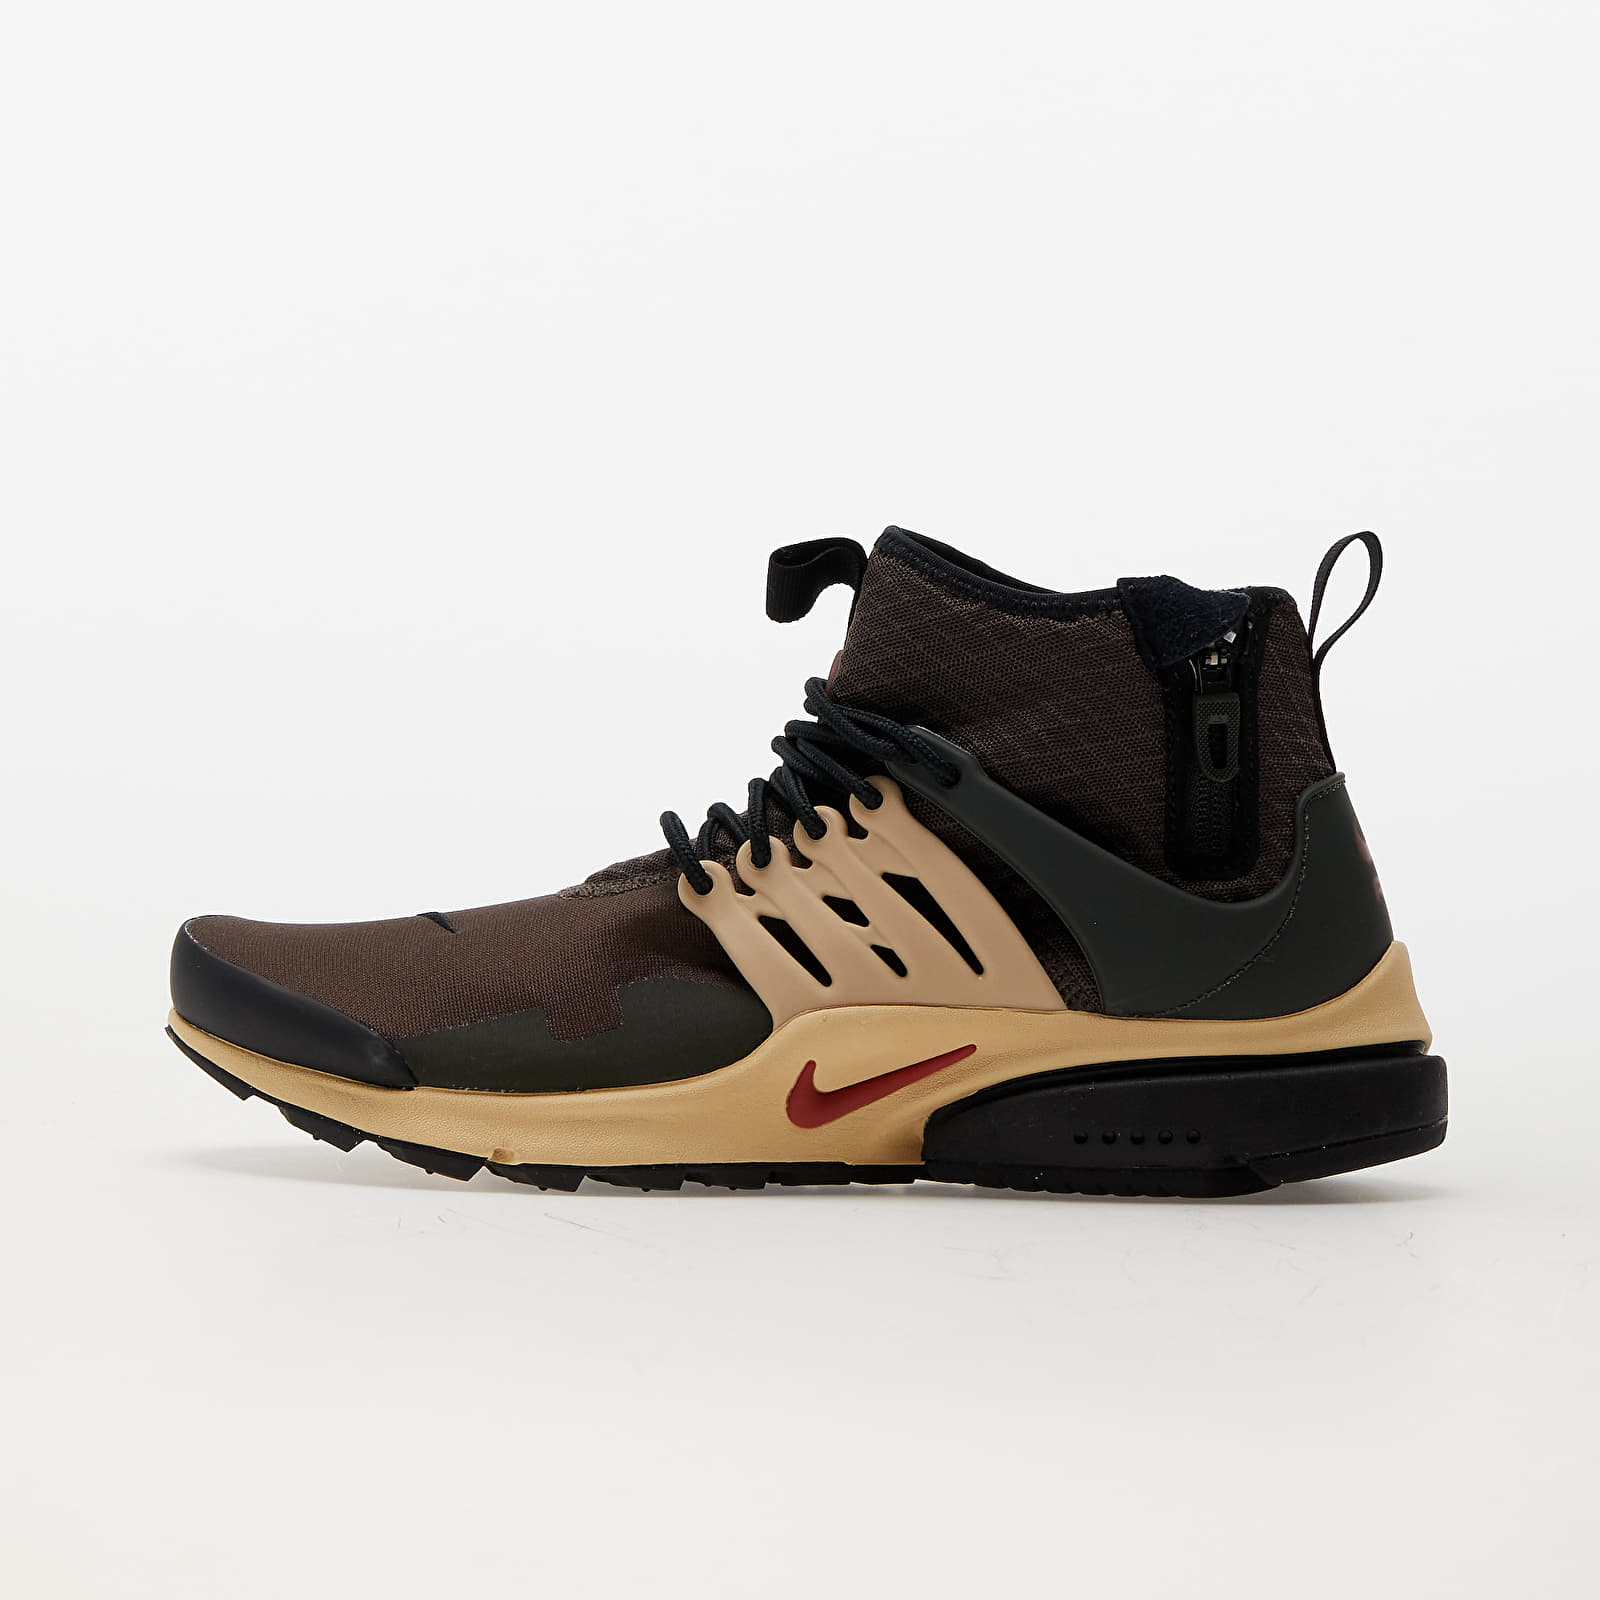 Chaussures et baskets homme Nike Air Presto Mid Utilityn Baroque Brown/ Canyon Rust-Sesame-Sequoia